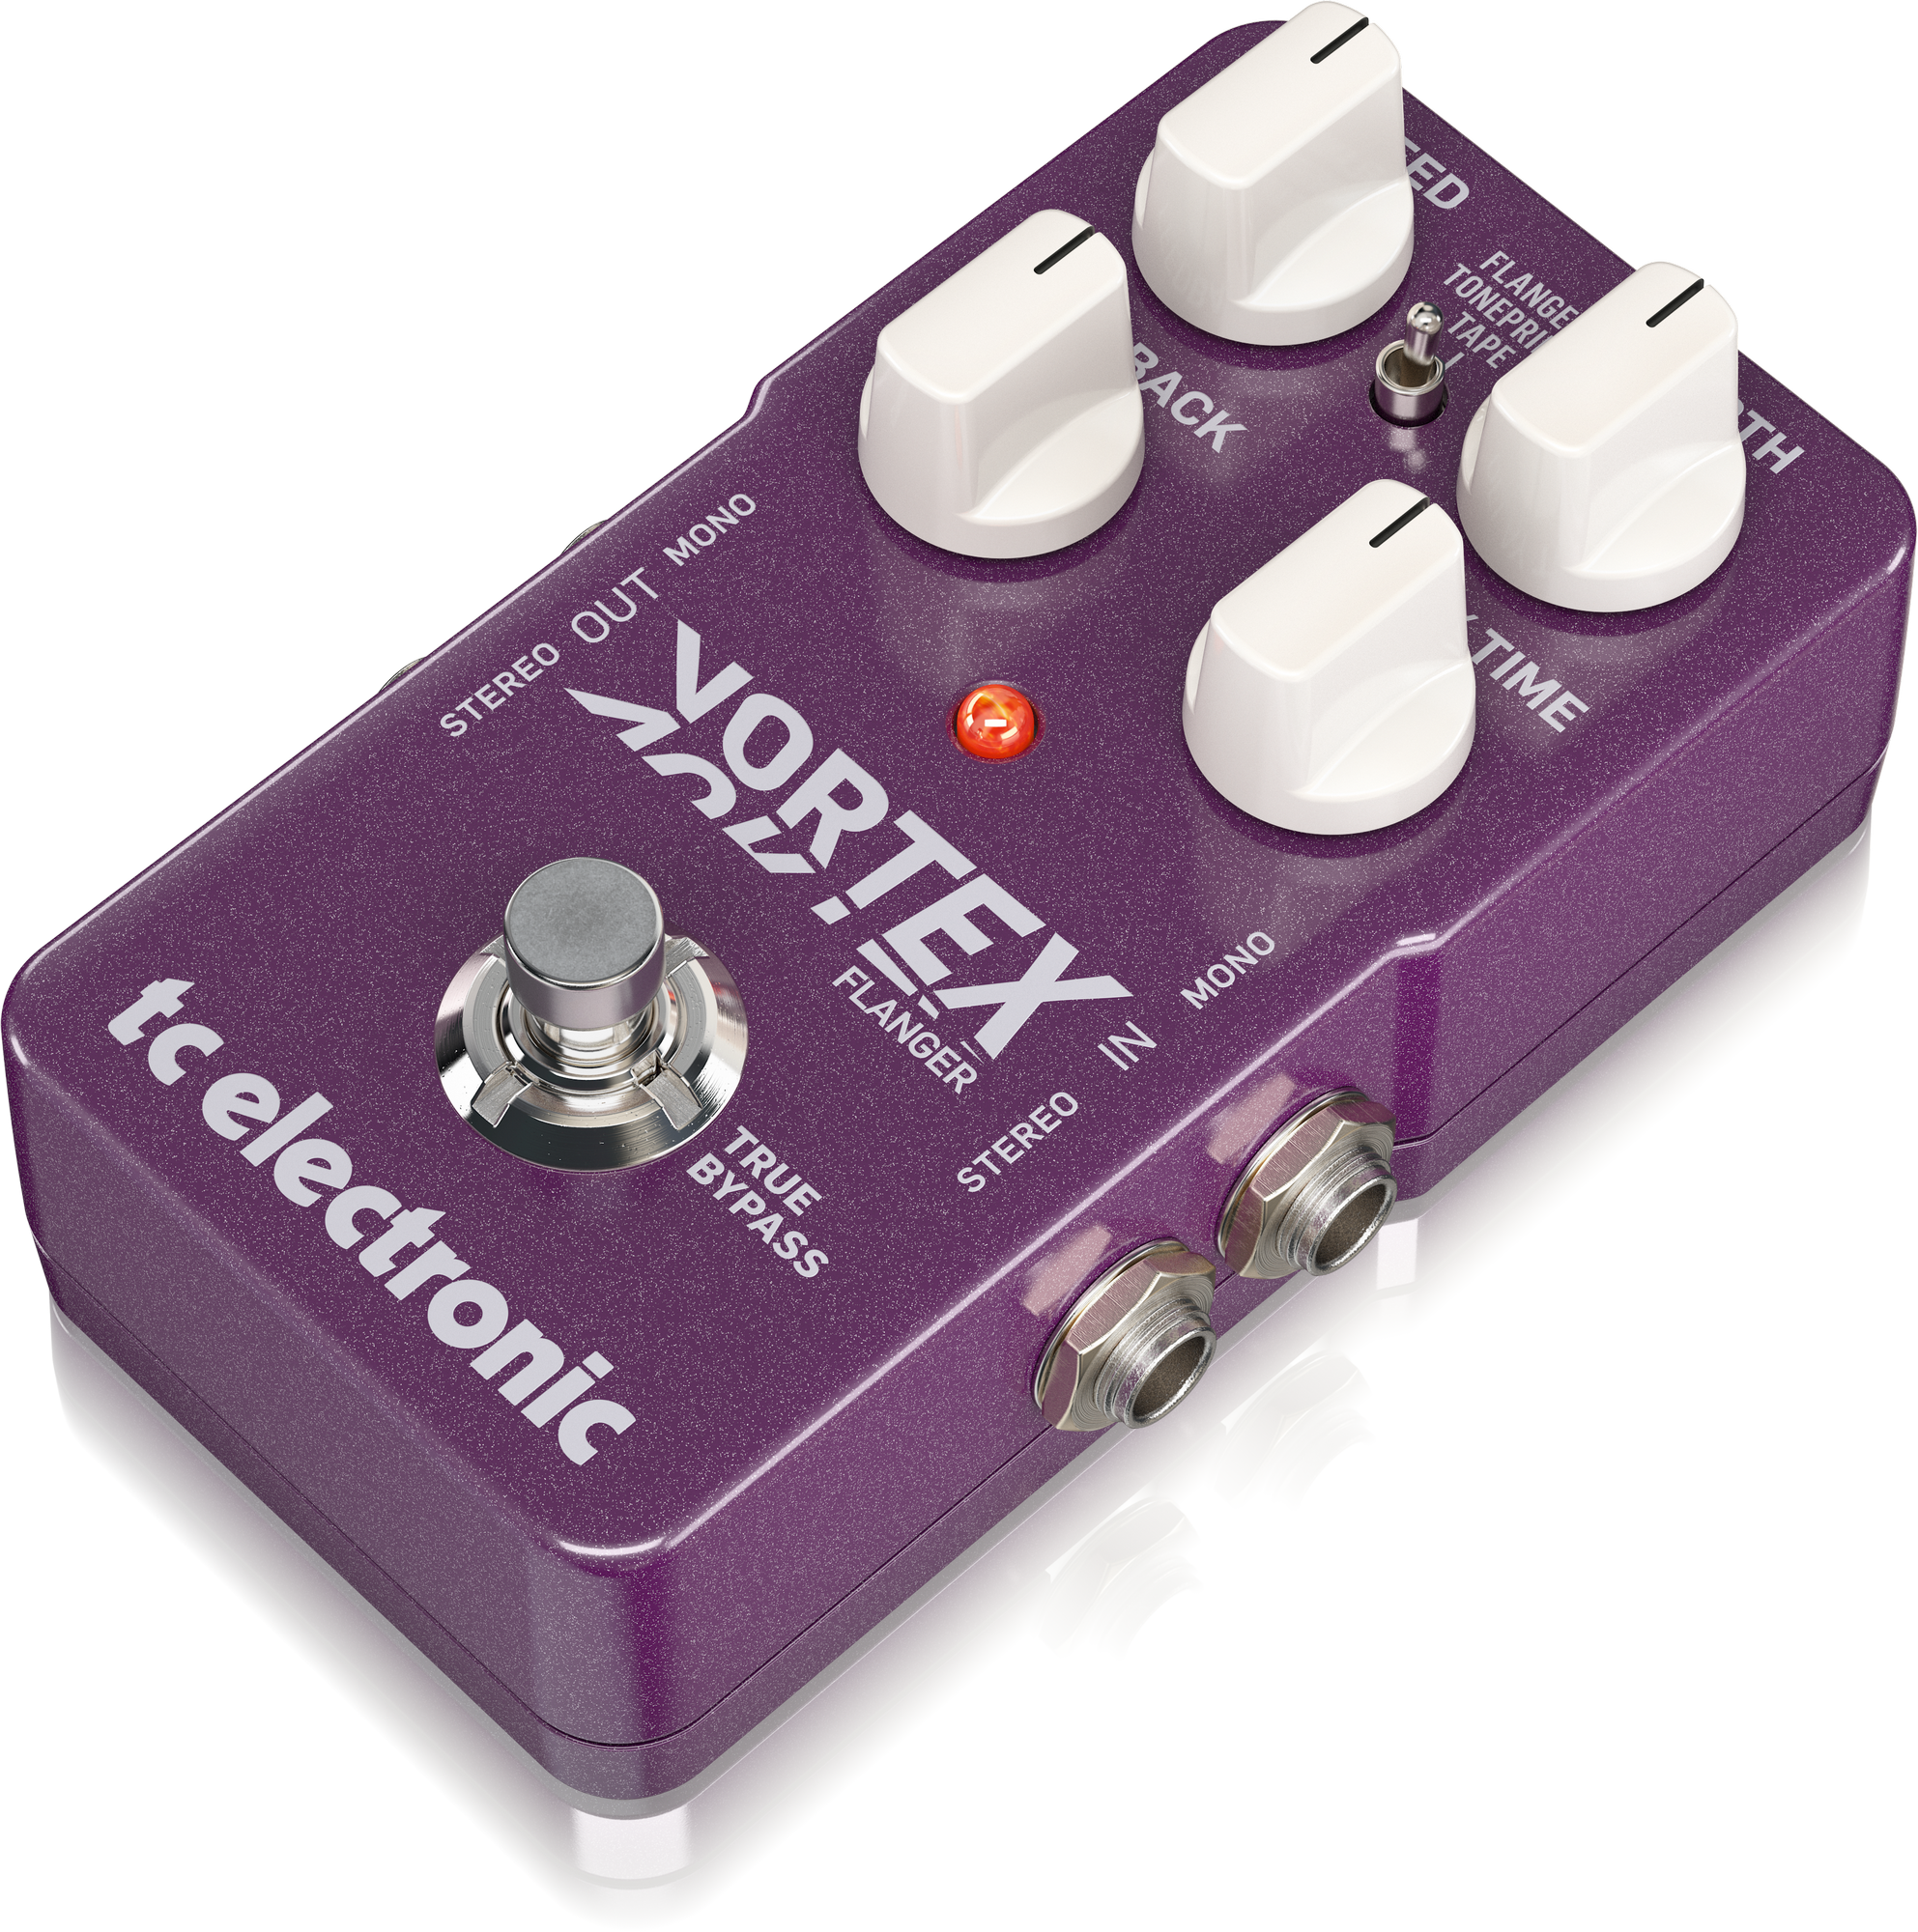 TC Electronic Vortex Flanger Outstanding Toneprint-enabled Flanger Pedal With 2 Built-in Flanger Modes, Deep Control And Stereo I/o, TC ELECTRONIC, EFFECTS, tc-electronic-effects-tc-vortex-flanger, ZOSO MUSIC SDN BHD